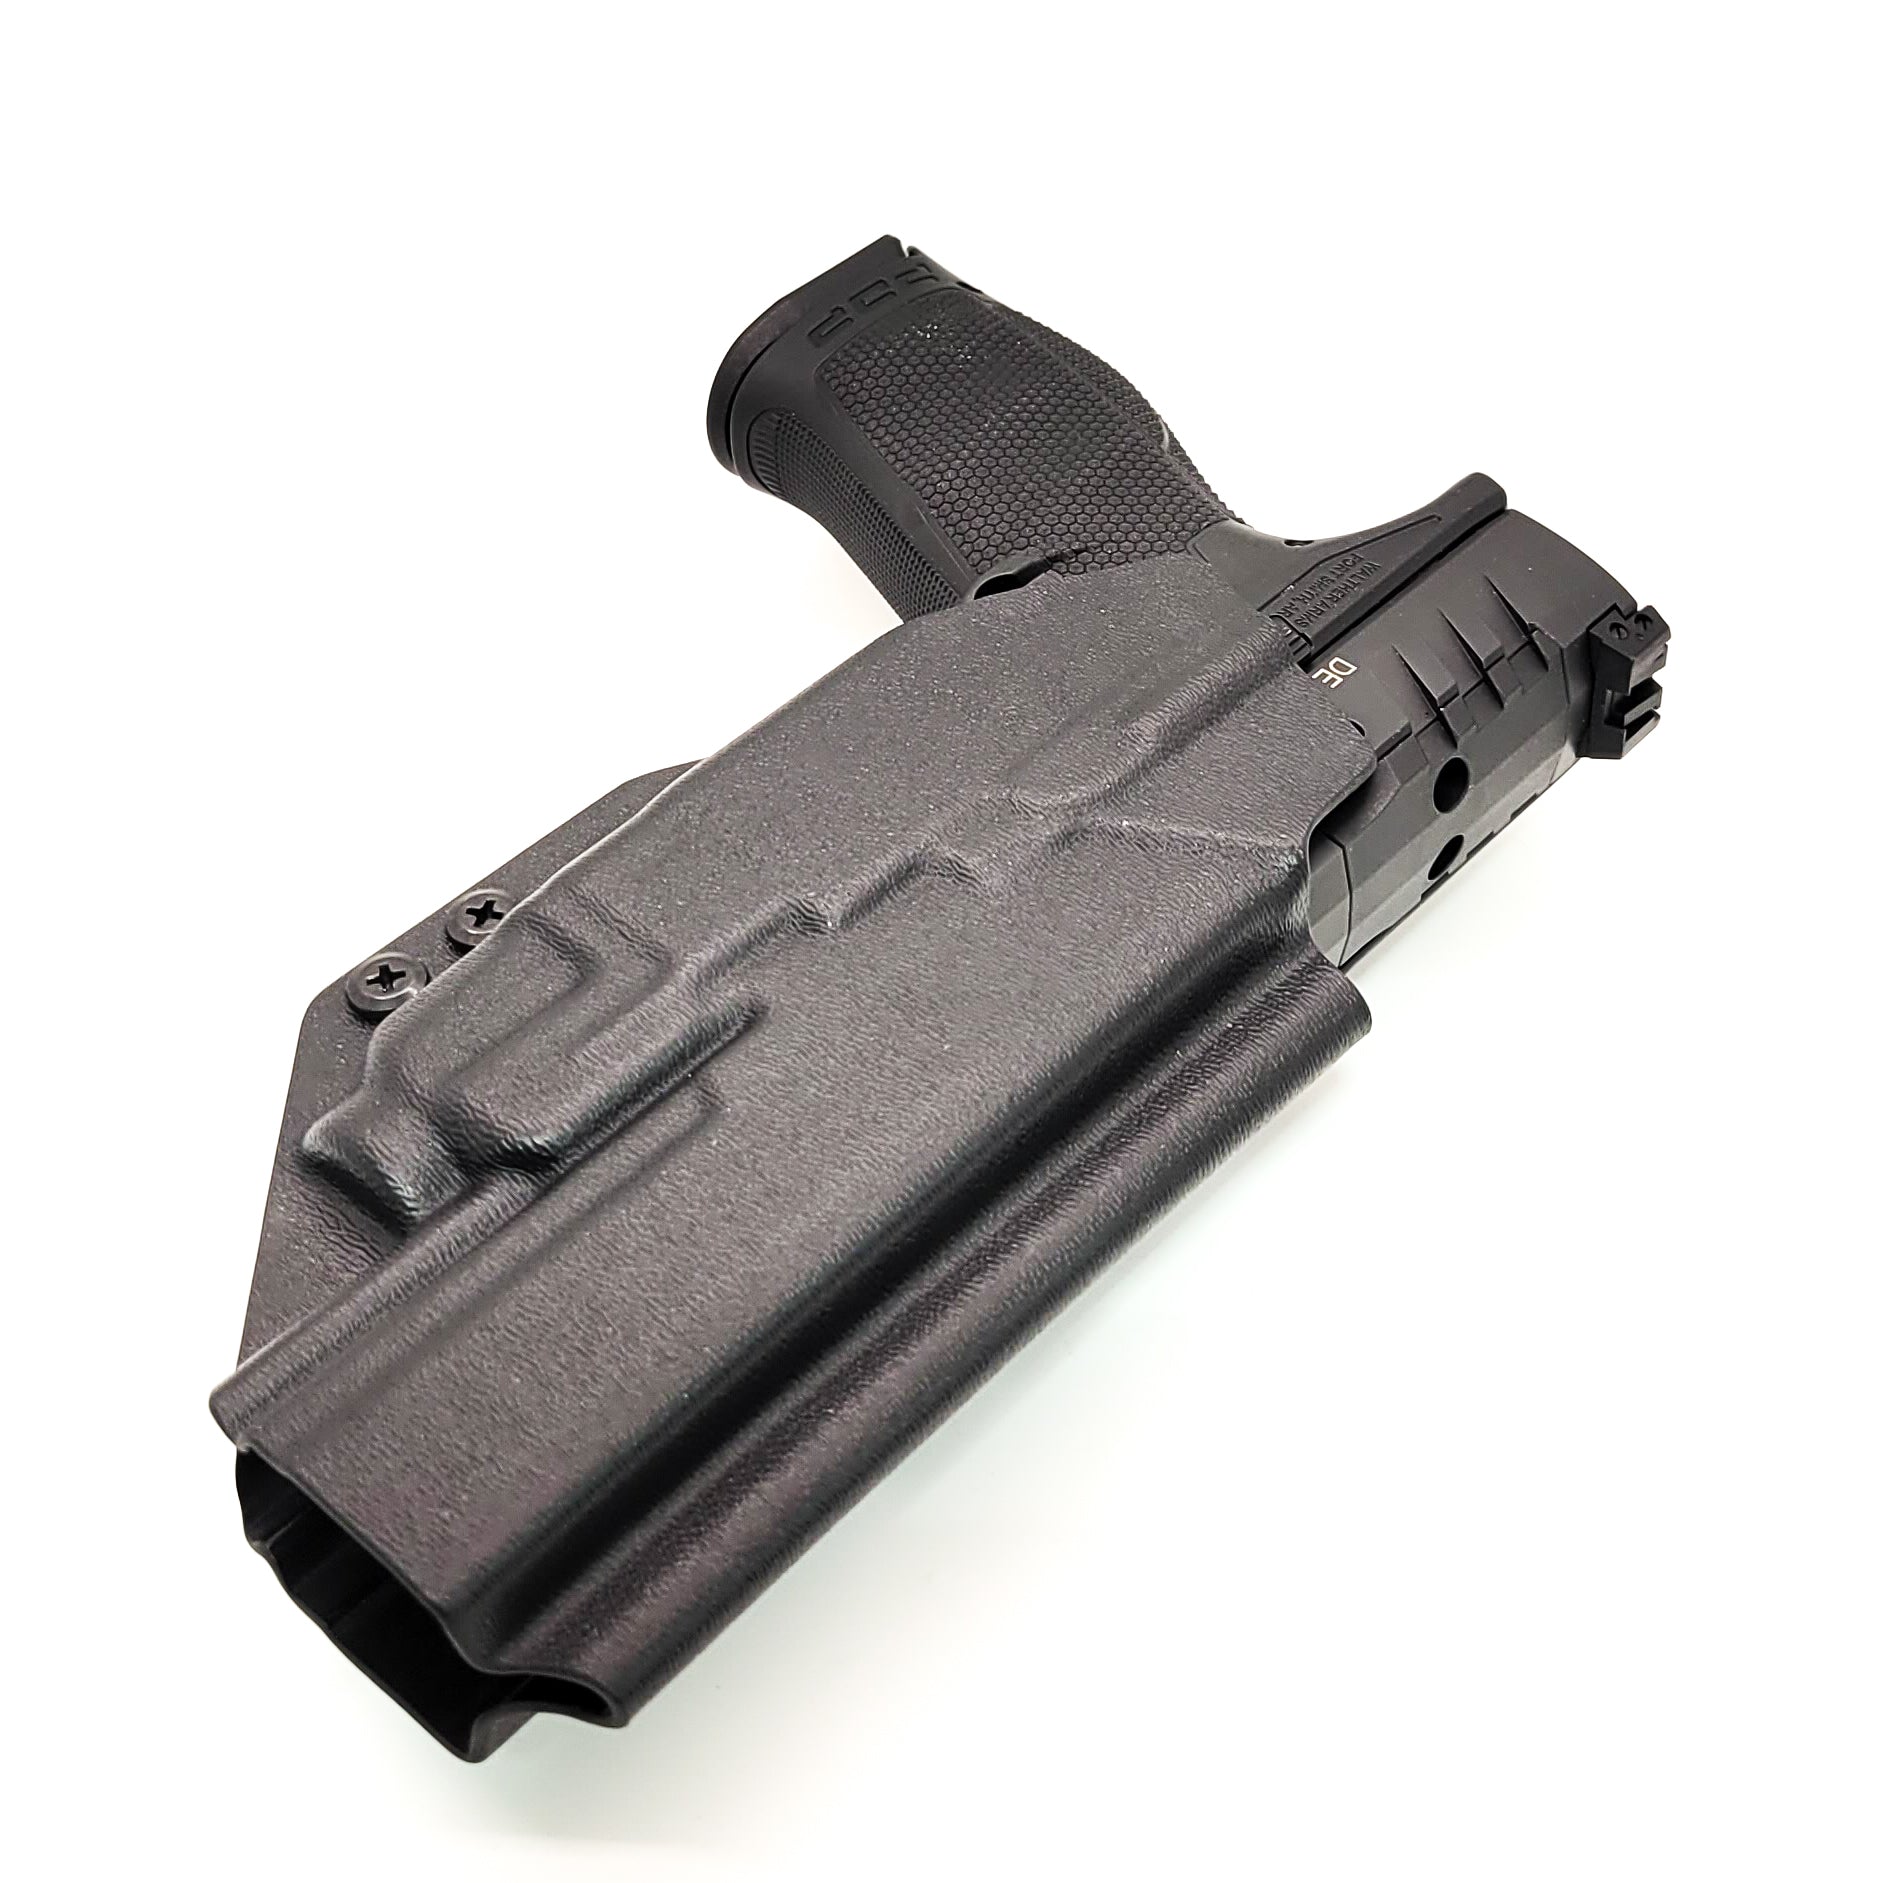 For the best Outside Waistband Taco Style Holster designed to fit the Walther PDP Compact 5" pistol with the Streamlight TLR-7A or TLR-7 mounted on the firearm, shop Four Brothers Holsters. Cut for red dot sight, full sweat guard, adjustable retention & open muzzle for threaded barrels & compensators. 